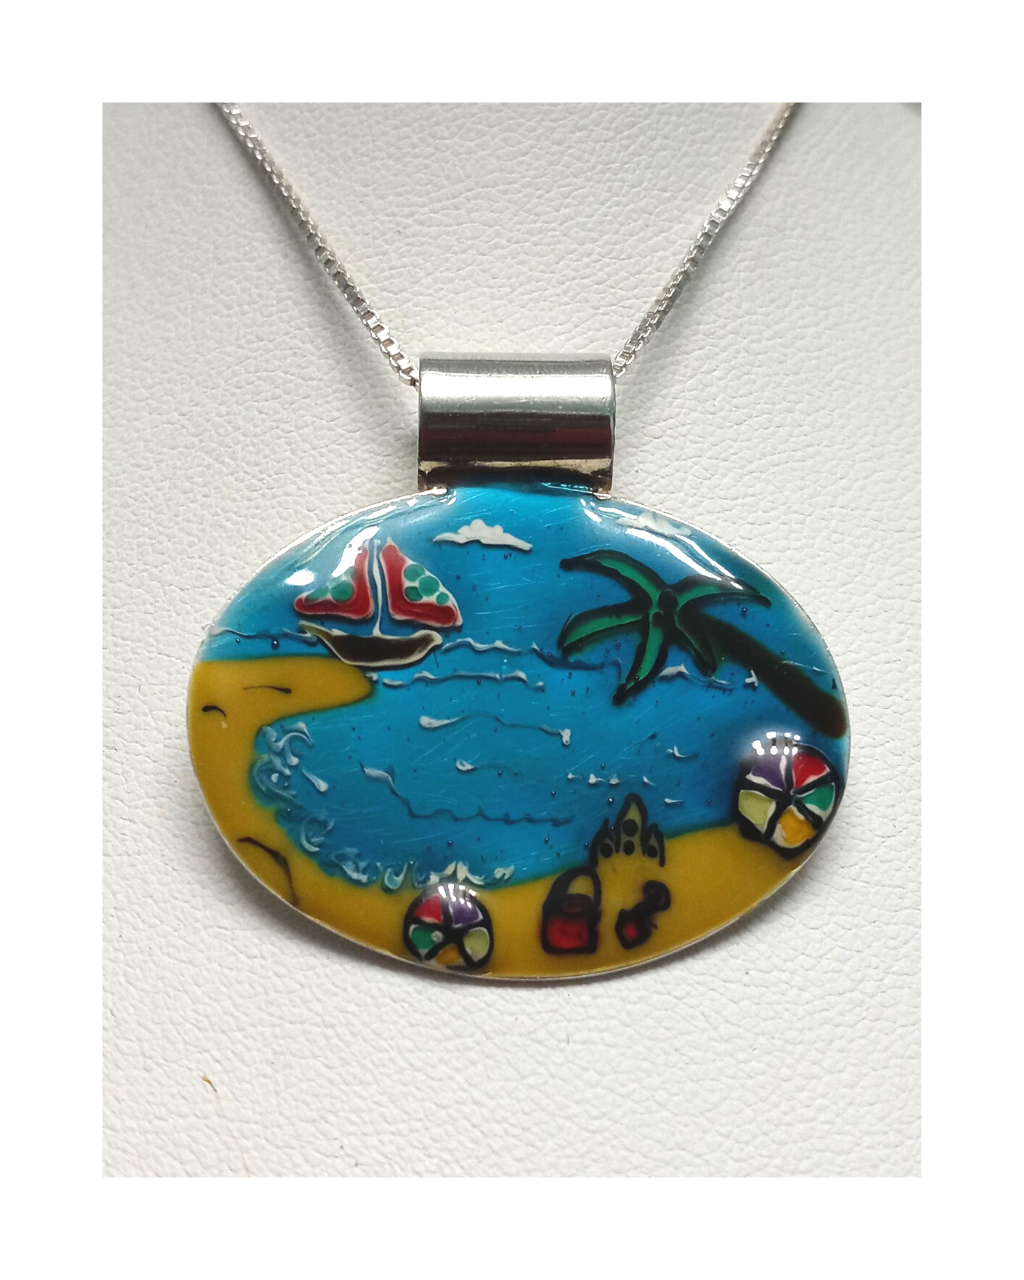 Exclusive Wearable Art Hand-enameled Beautiful Summer Beach Scene Removable Slide Pendant 1 3/8"L X 1 3/8"W Sterling Necklace on 18" Box Chain. ONLY ONE CREATED!